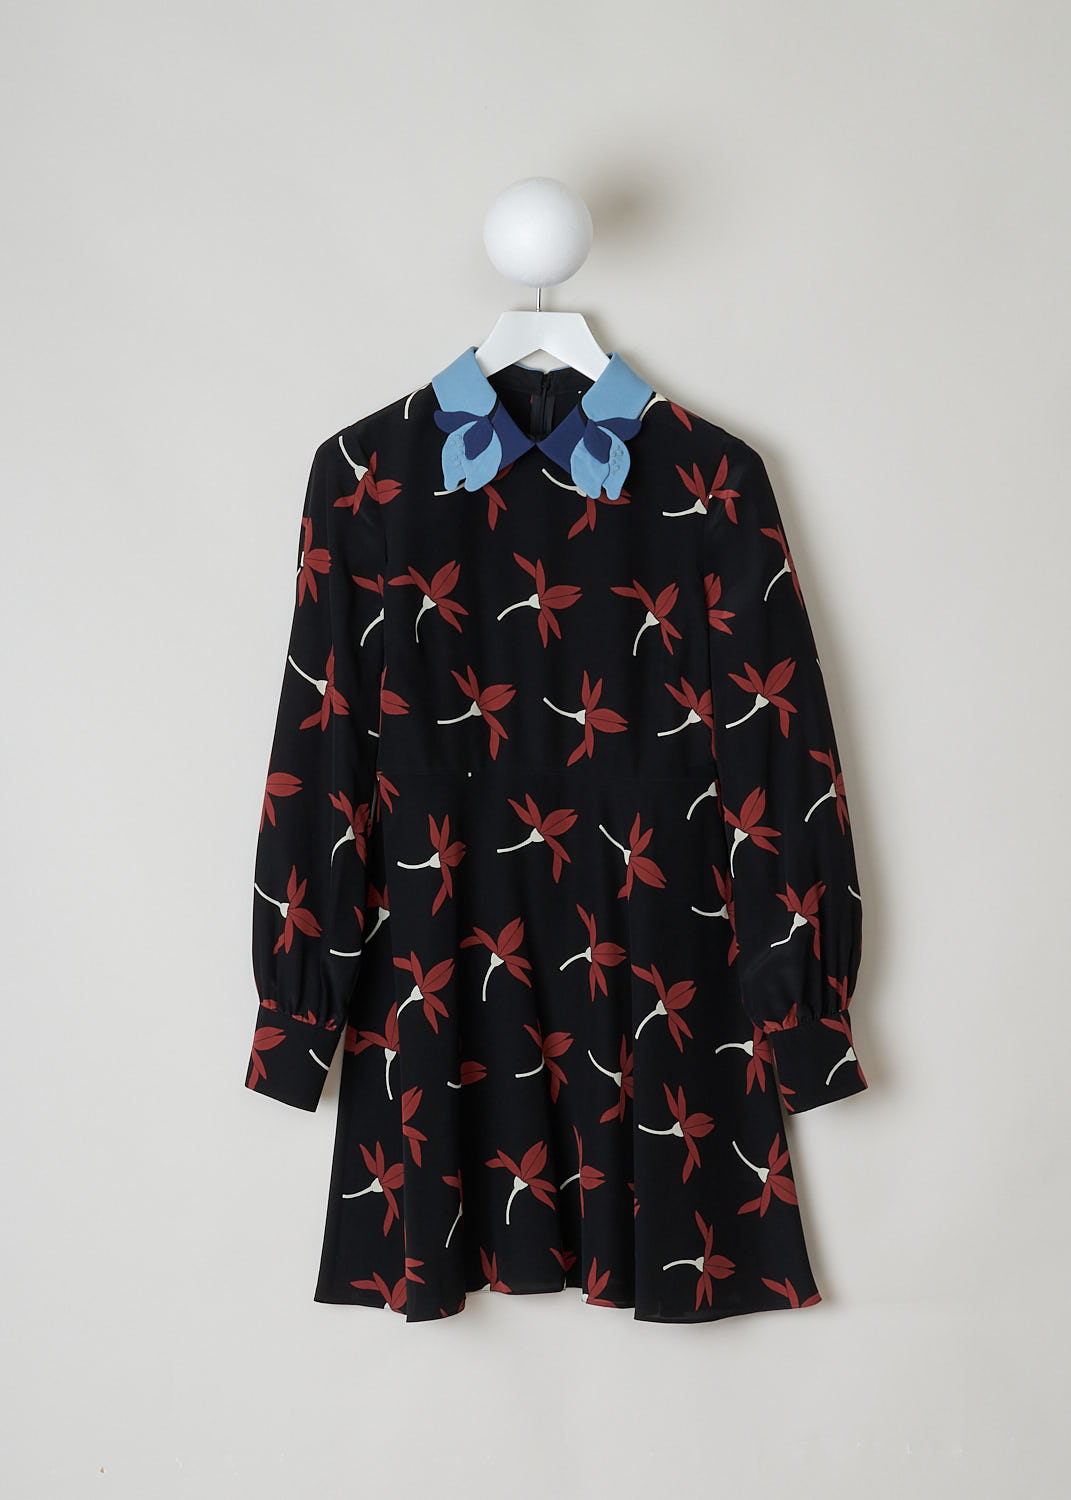 VALENTINO, BLACK PRINTED DRESS WITH BLUE FLORAL COLLAR, XB3VAXZ96UN_K92, Print, Front, This black long sleeve dress has a red and white flower print. Noteworthy is the contrasting blue floral collar. In the back, a concealed centre zipper can be found. 
